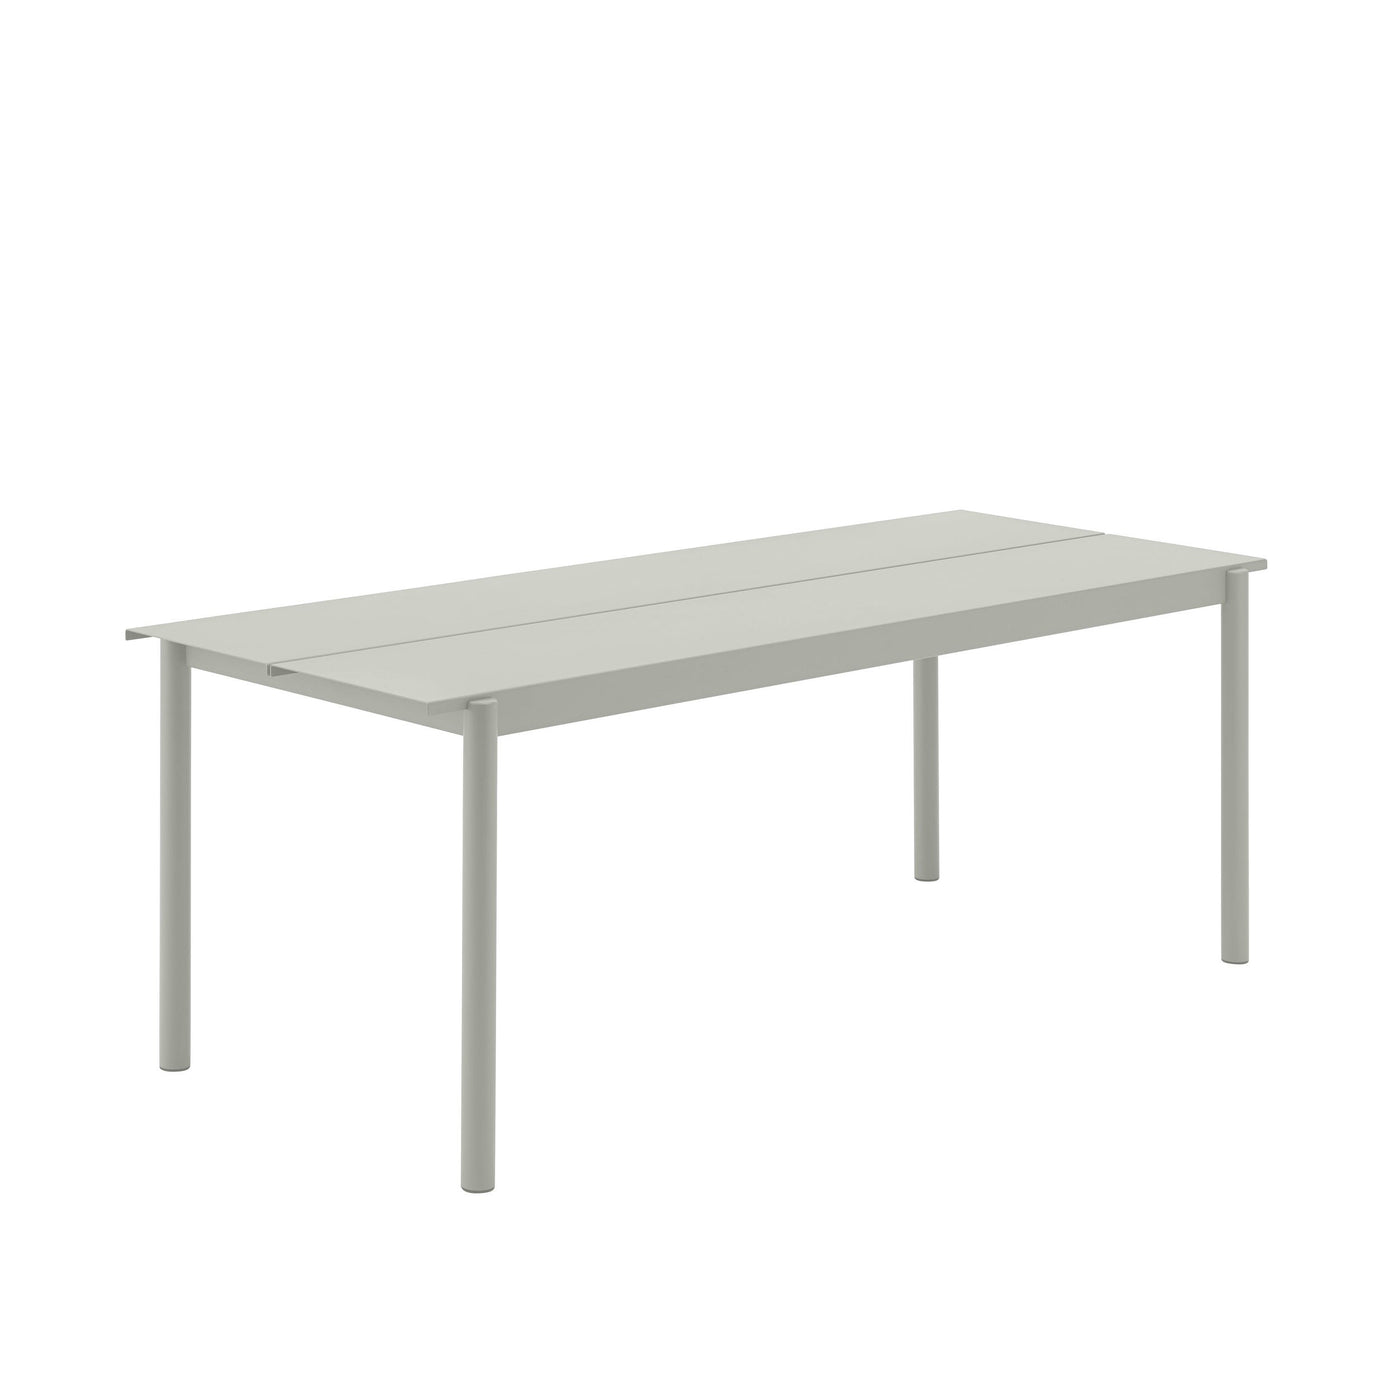 Muuto Linear Steel Table 200x75, outdoor furniture at someday designs #colour_grey